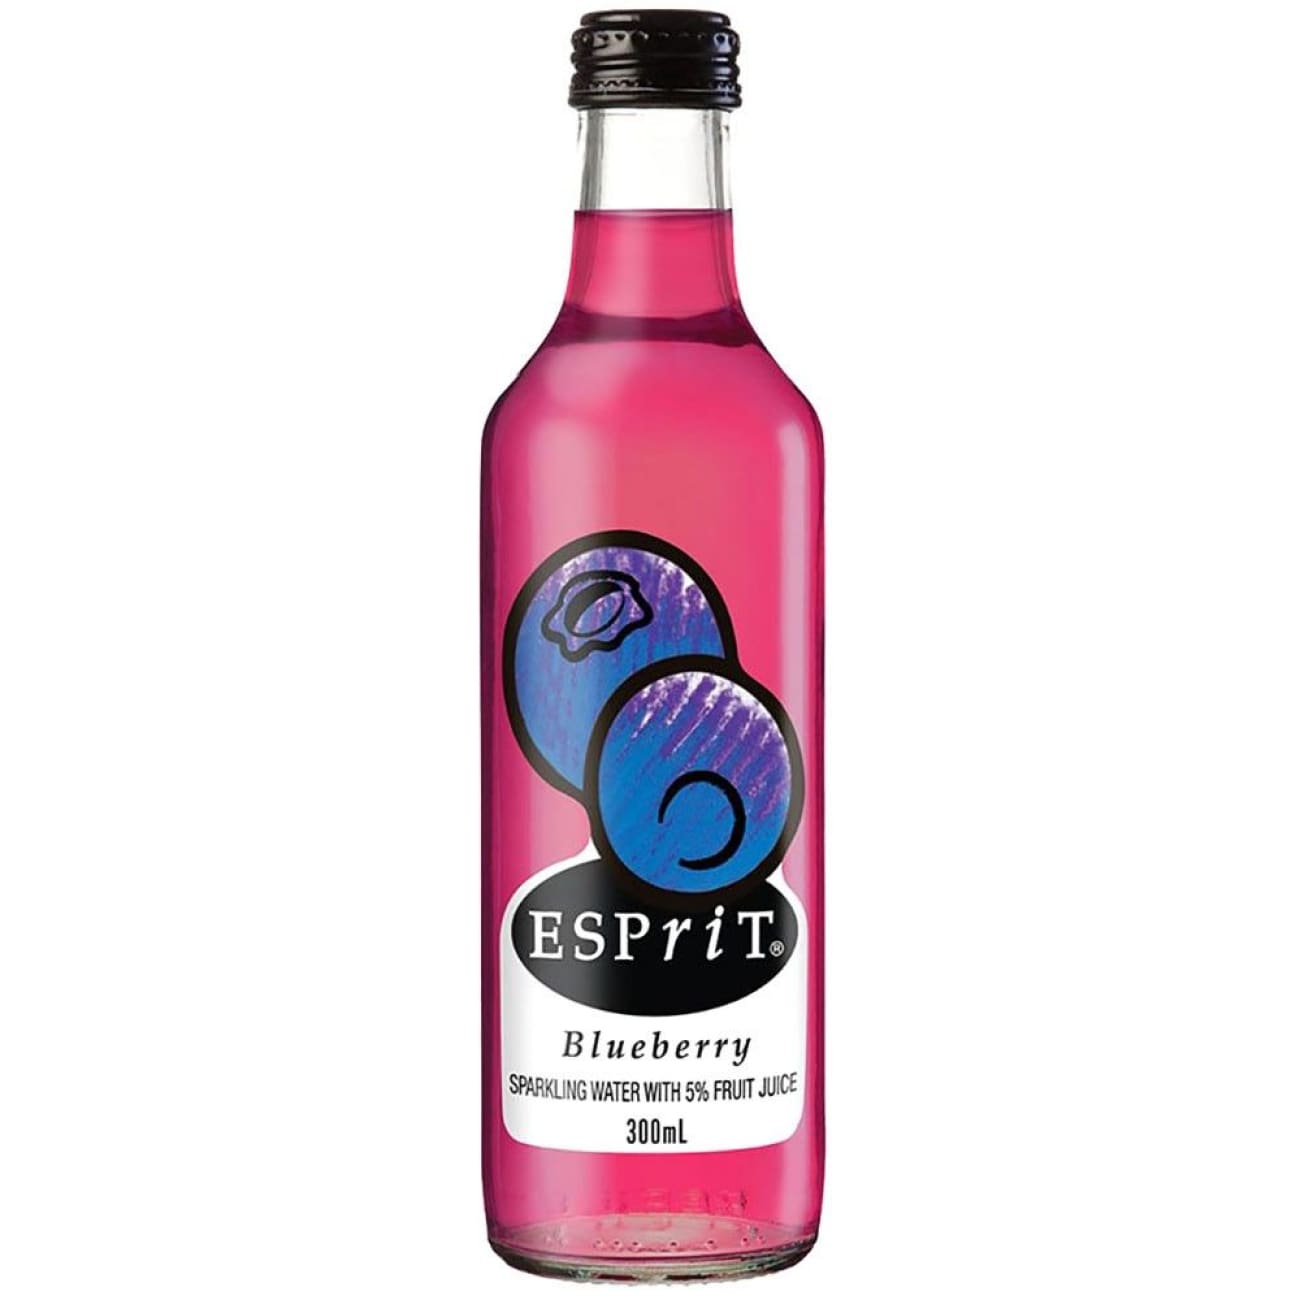 Esprit blueberry 300ml carton x 24 sippify – Sippify